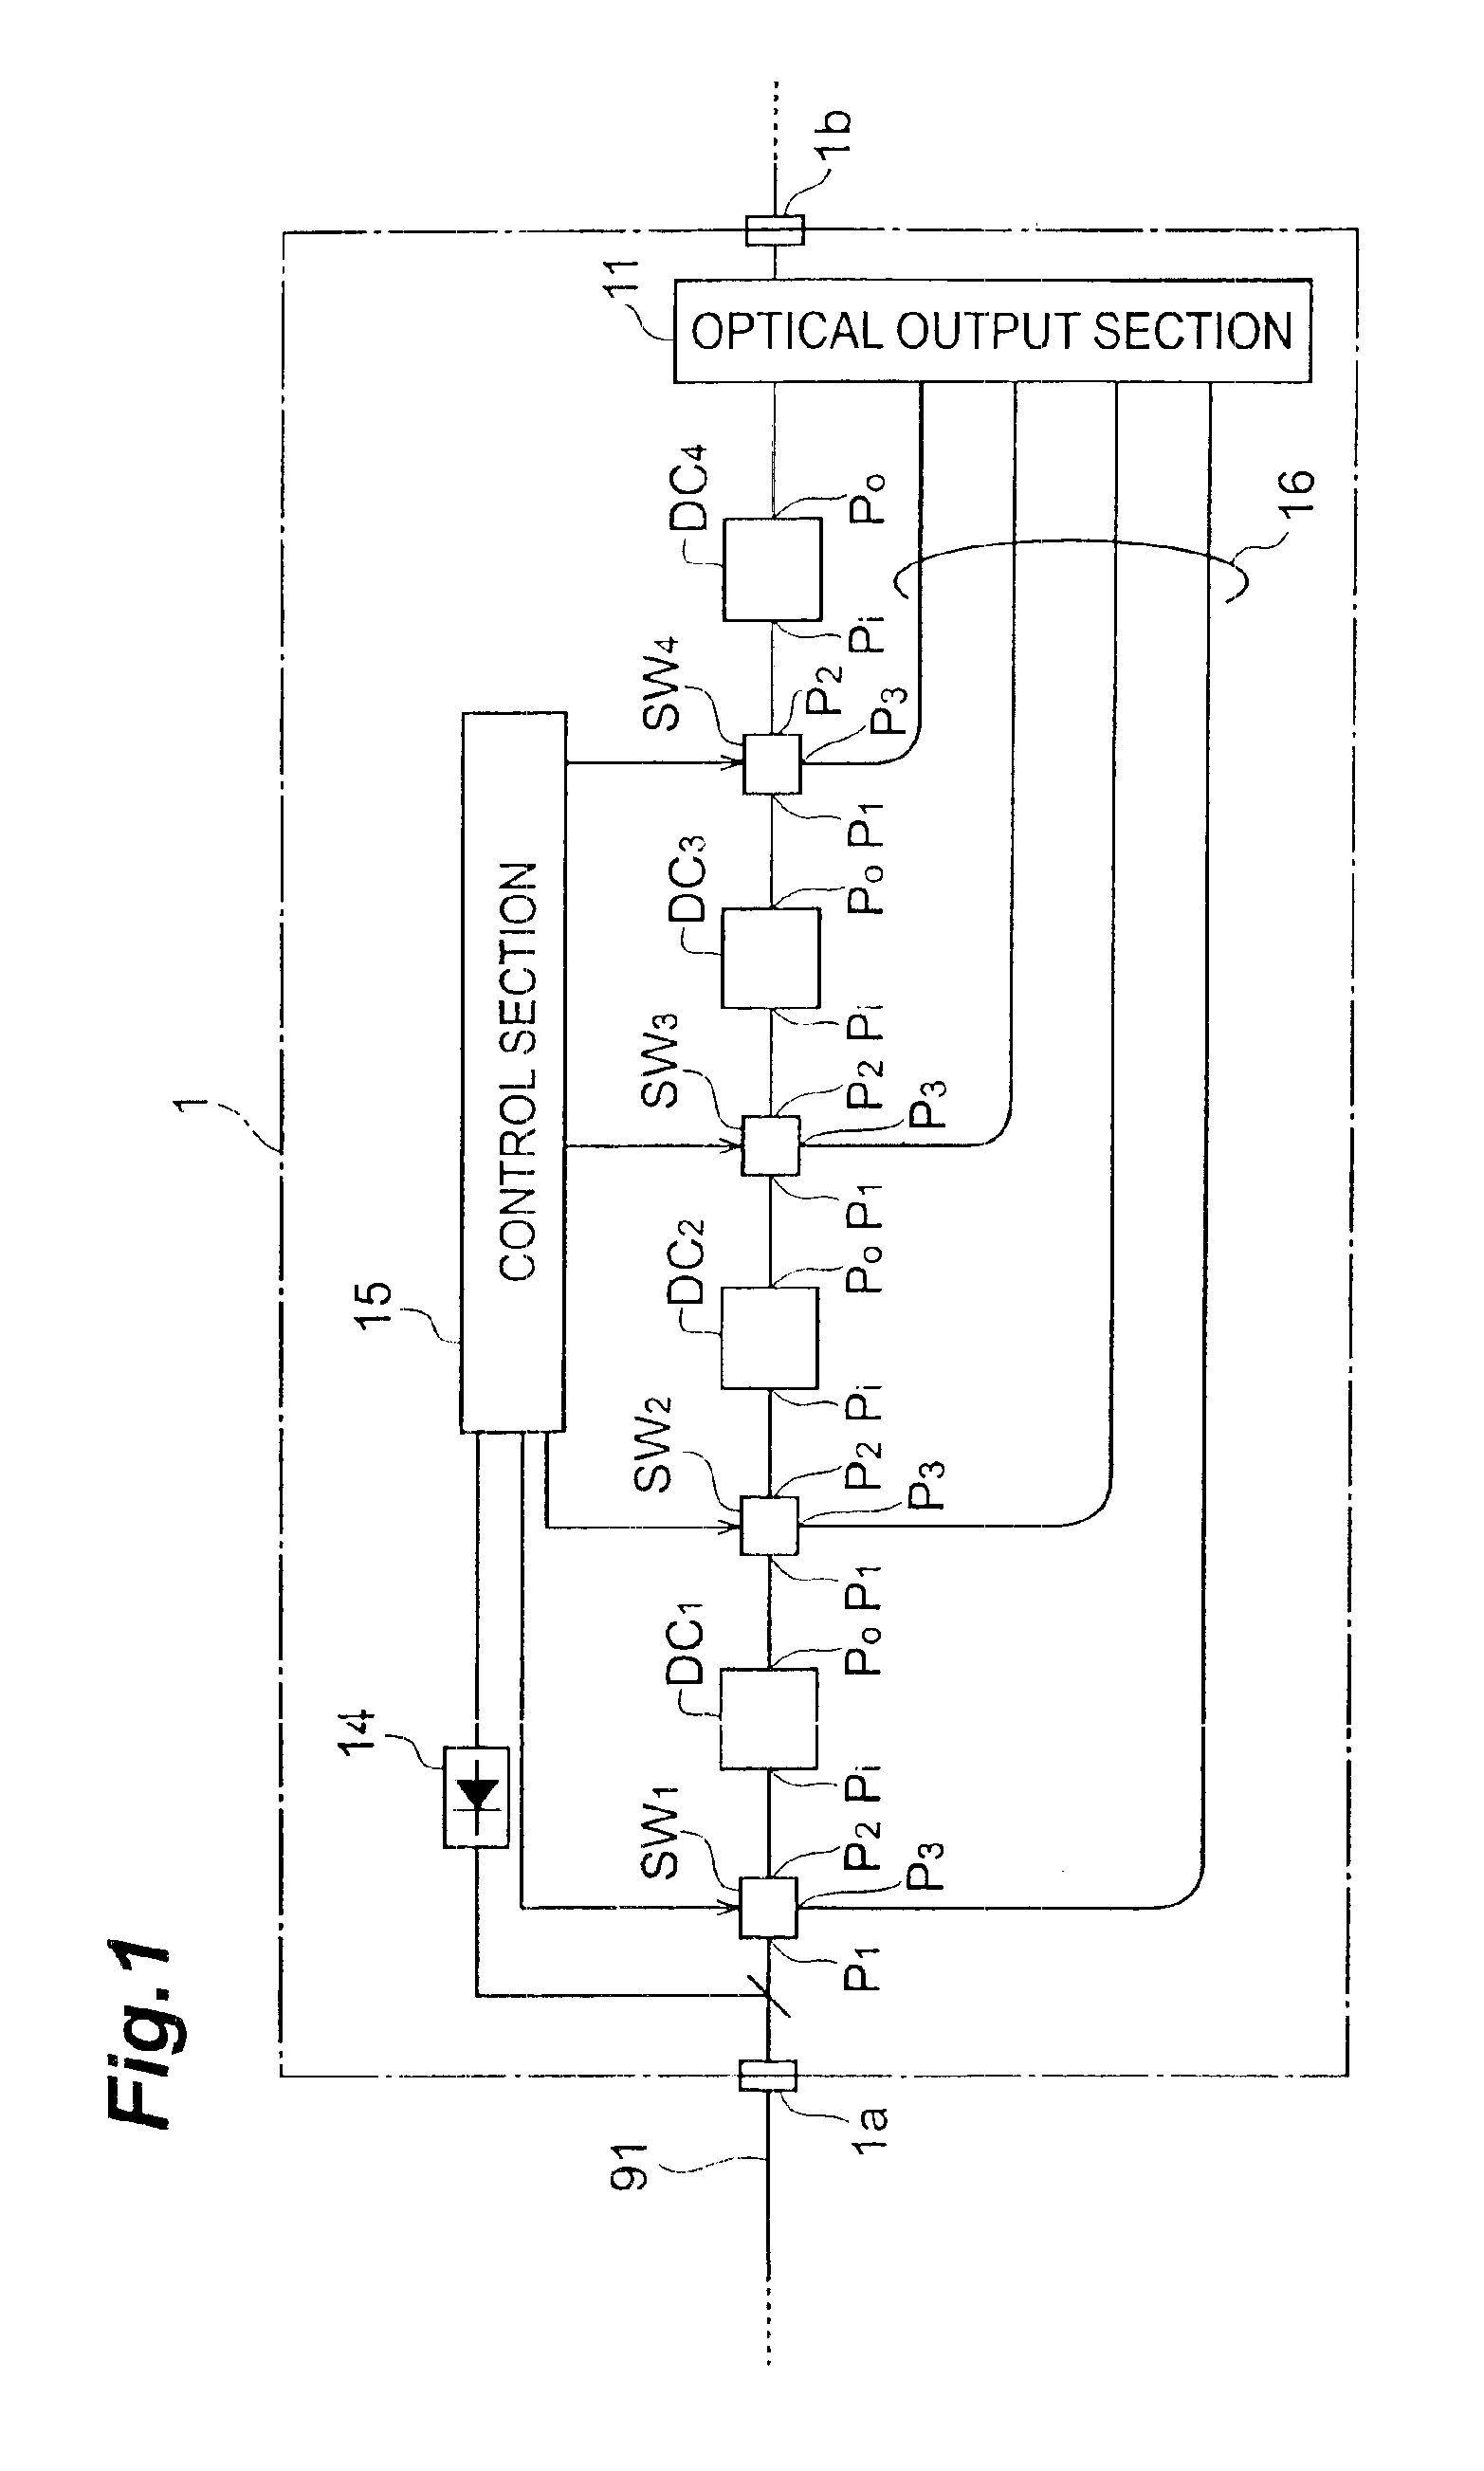 Dispersion compensating module, line switching apparatus and optical communication system